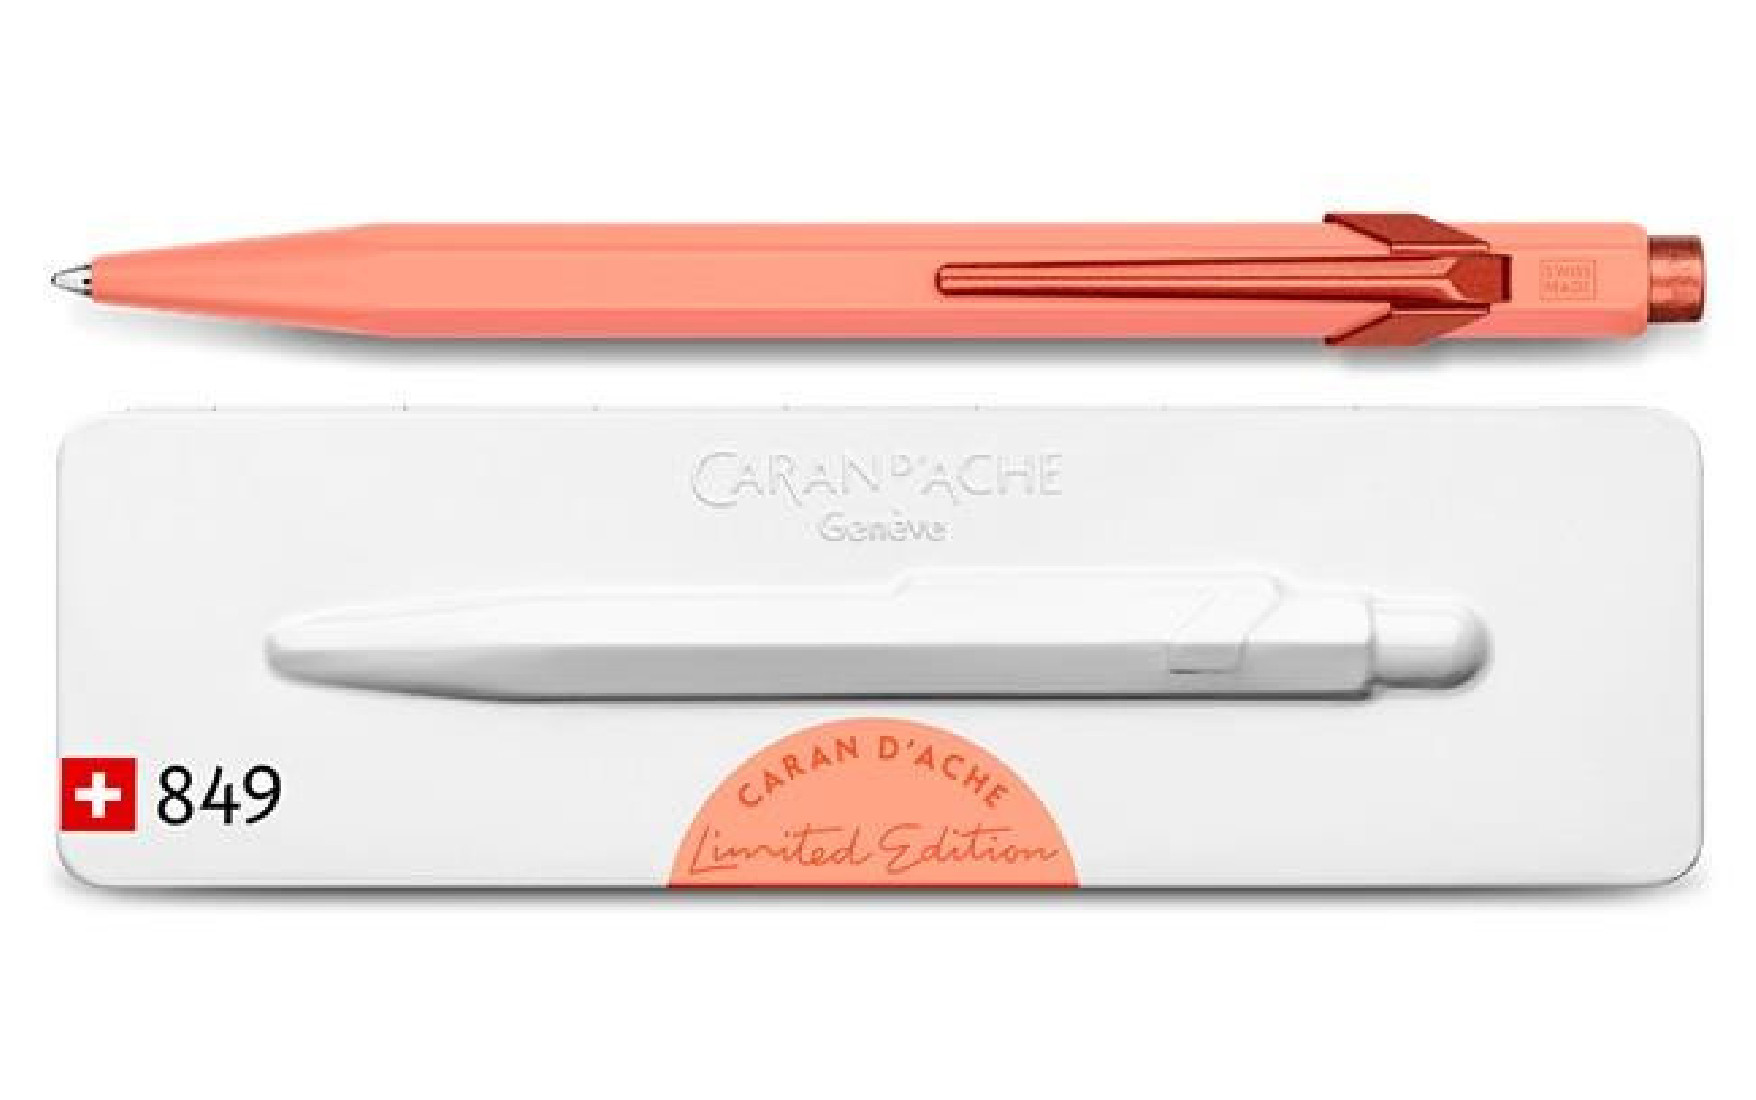 Carandache Ballpoint Pen 849 Claim your Style Tangerine – Limited Edition